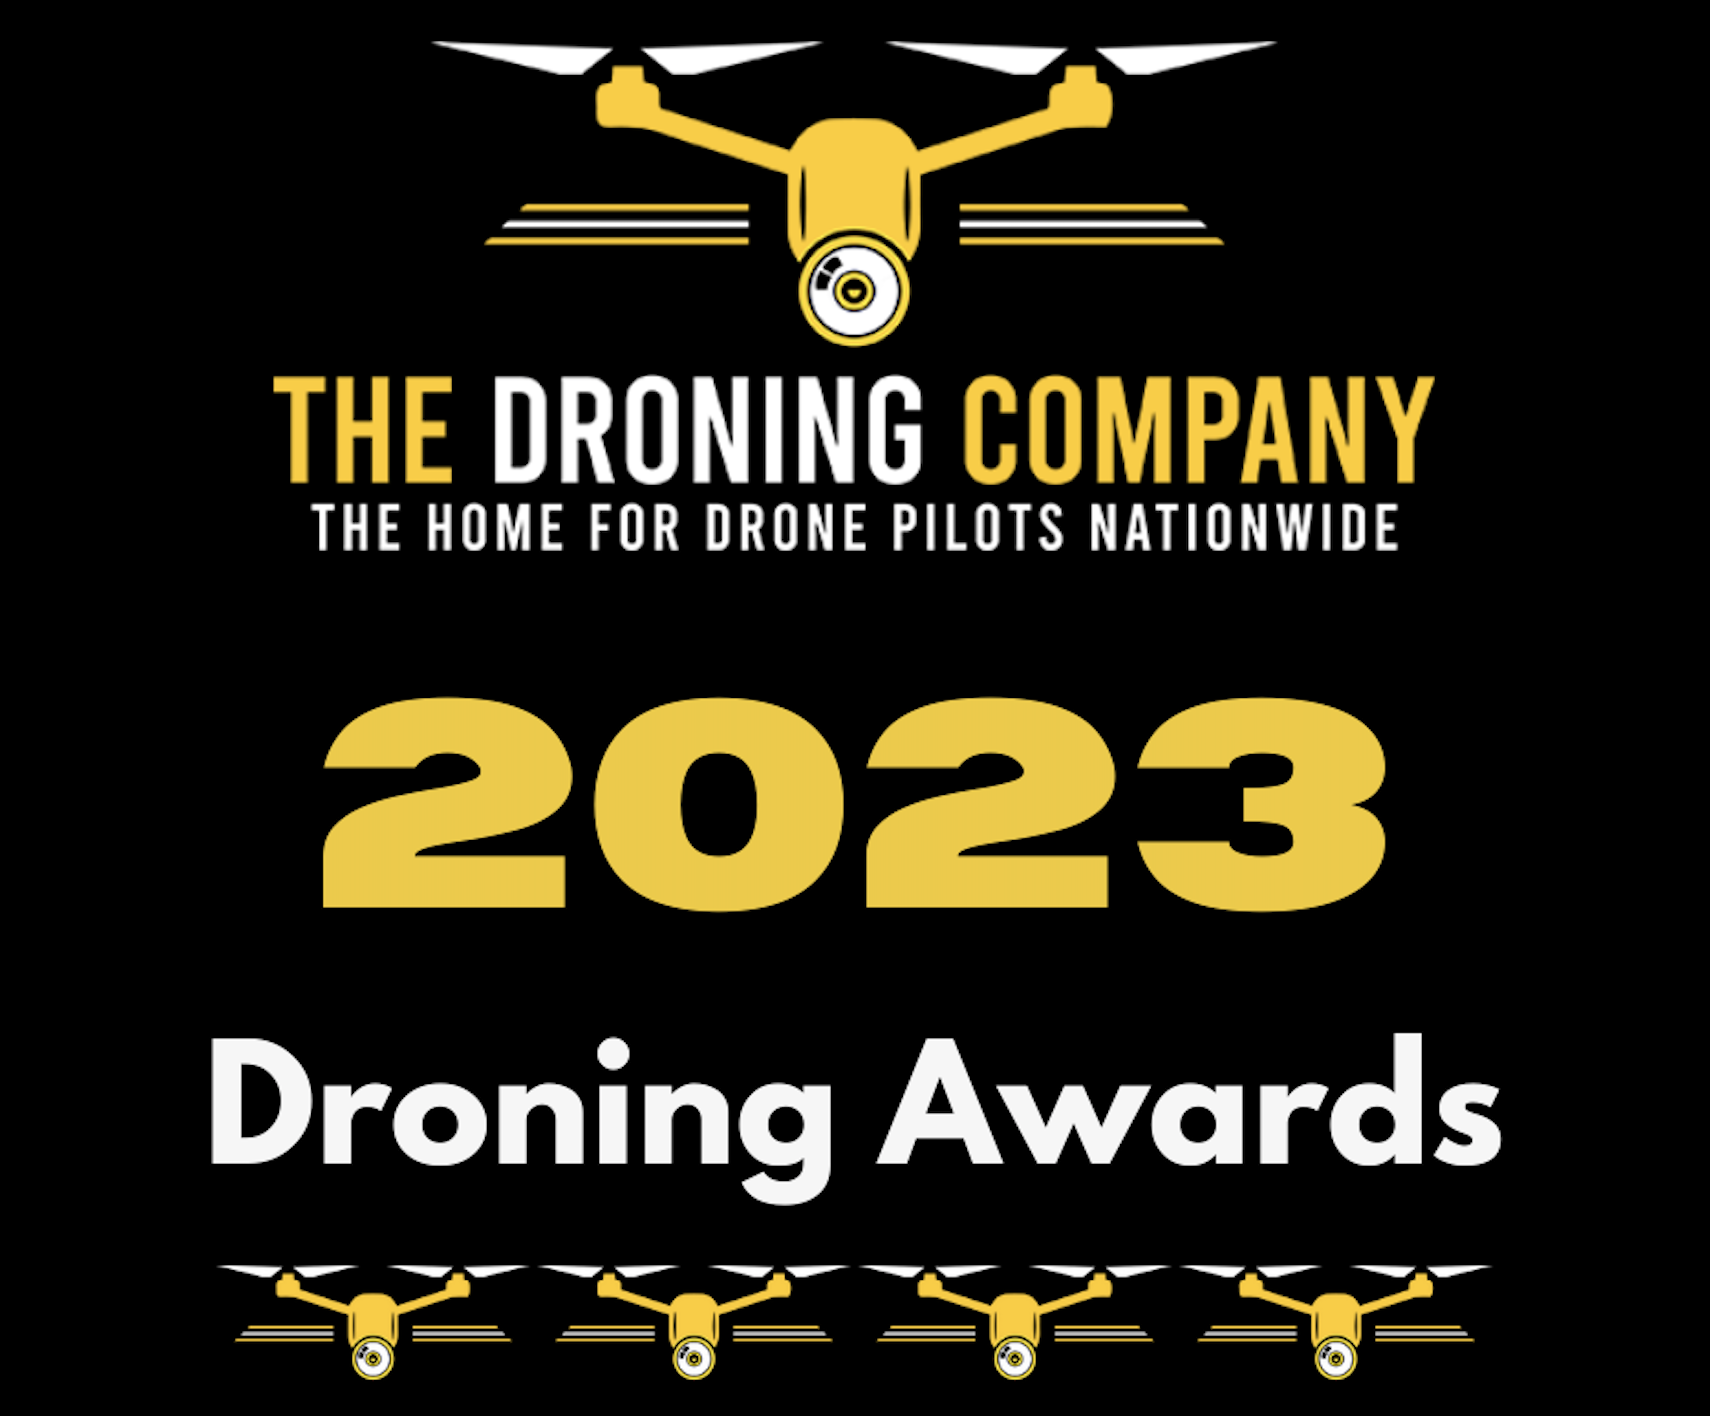 Vote in the 2023 Droning Awards and enter our drone give-a-way sweepstakes